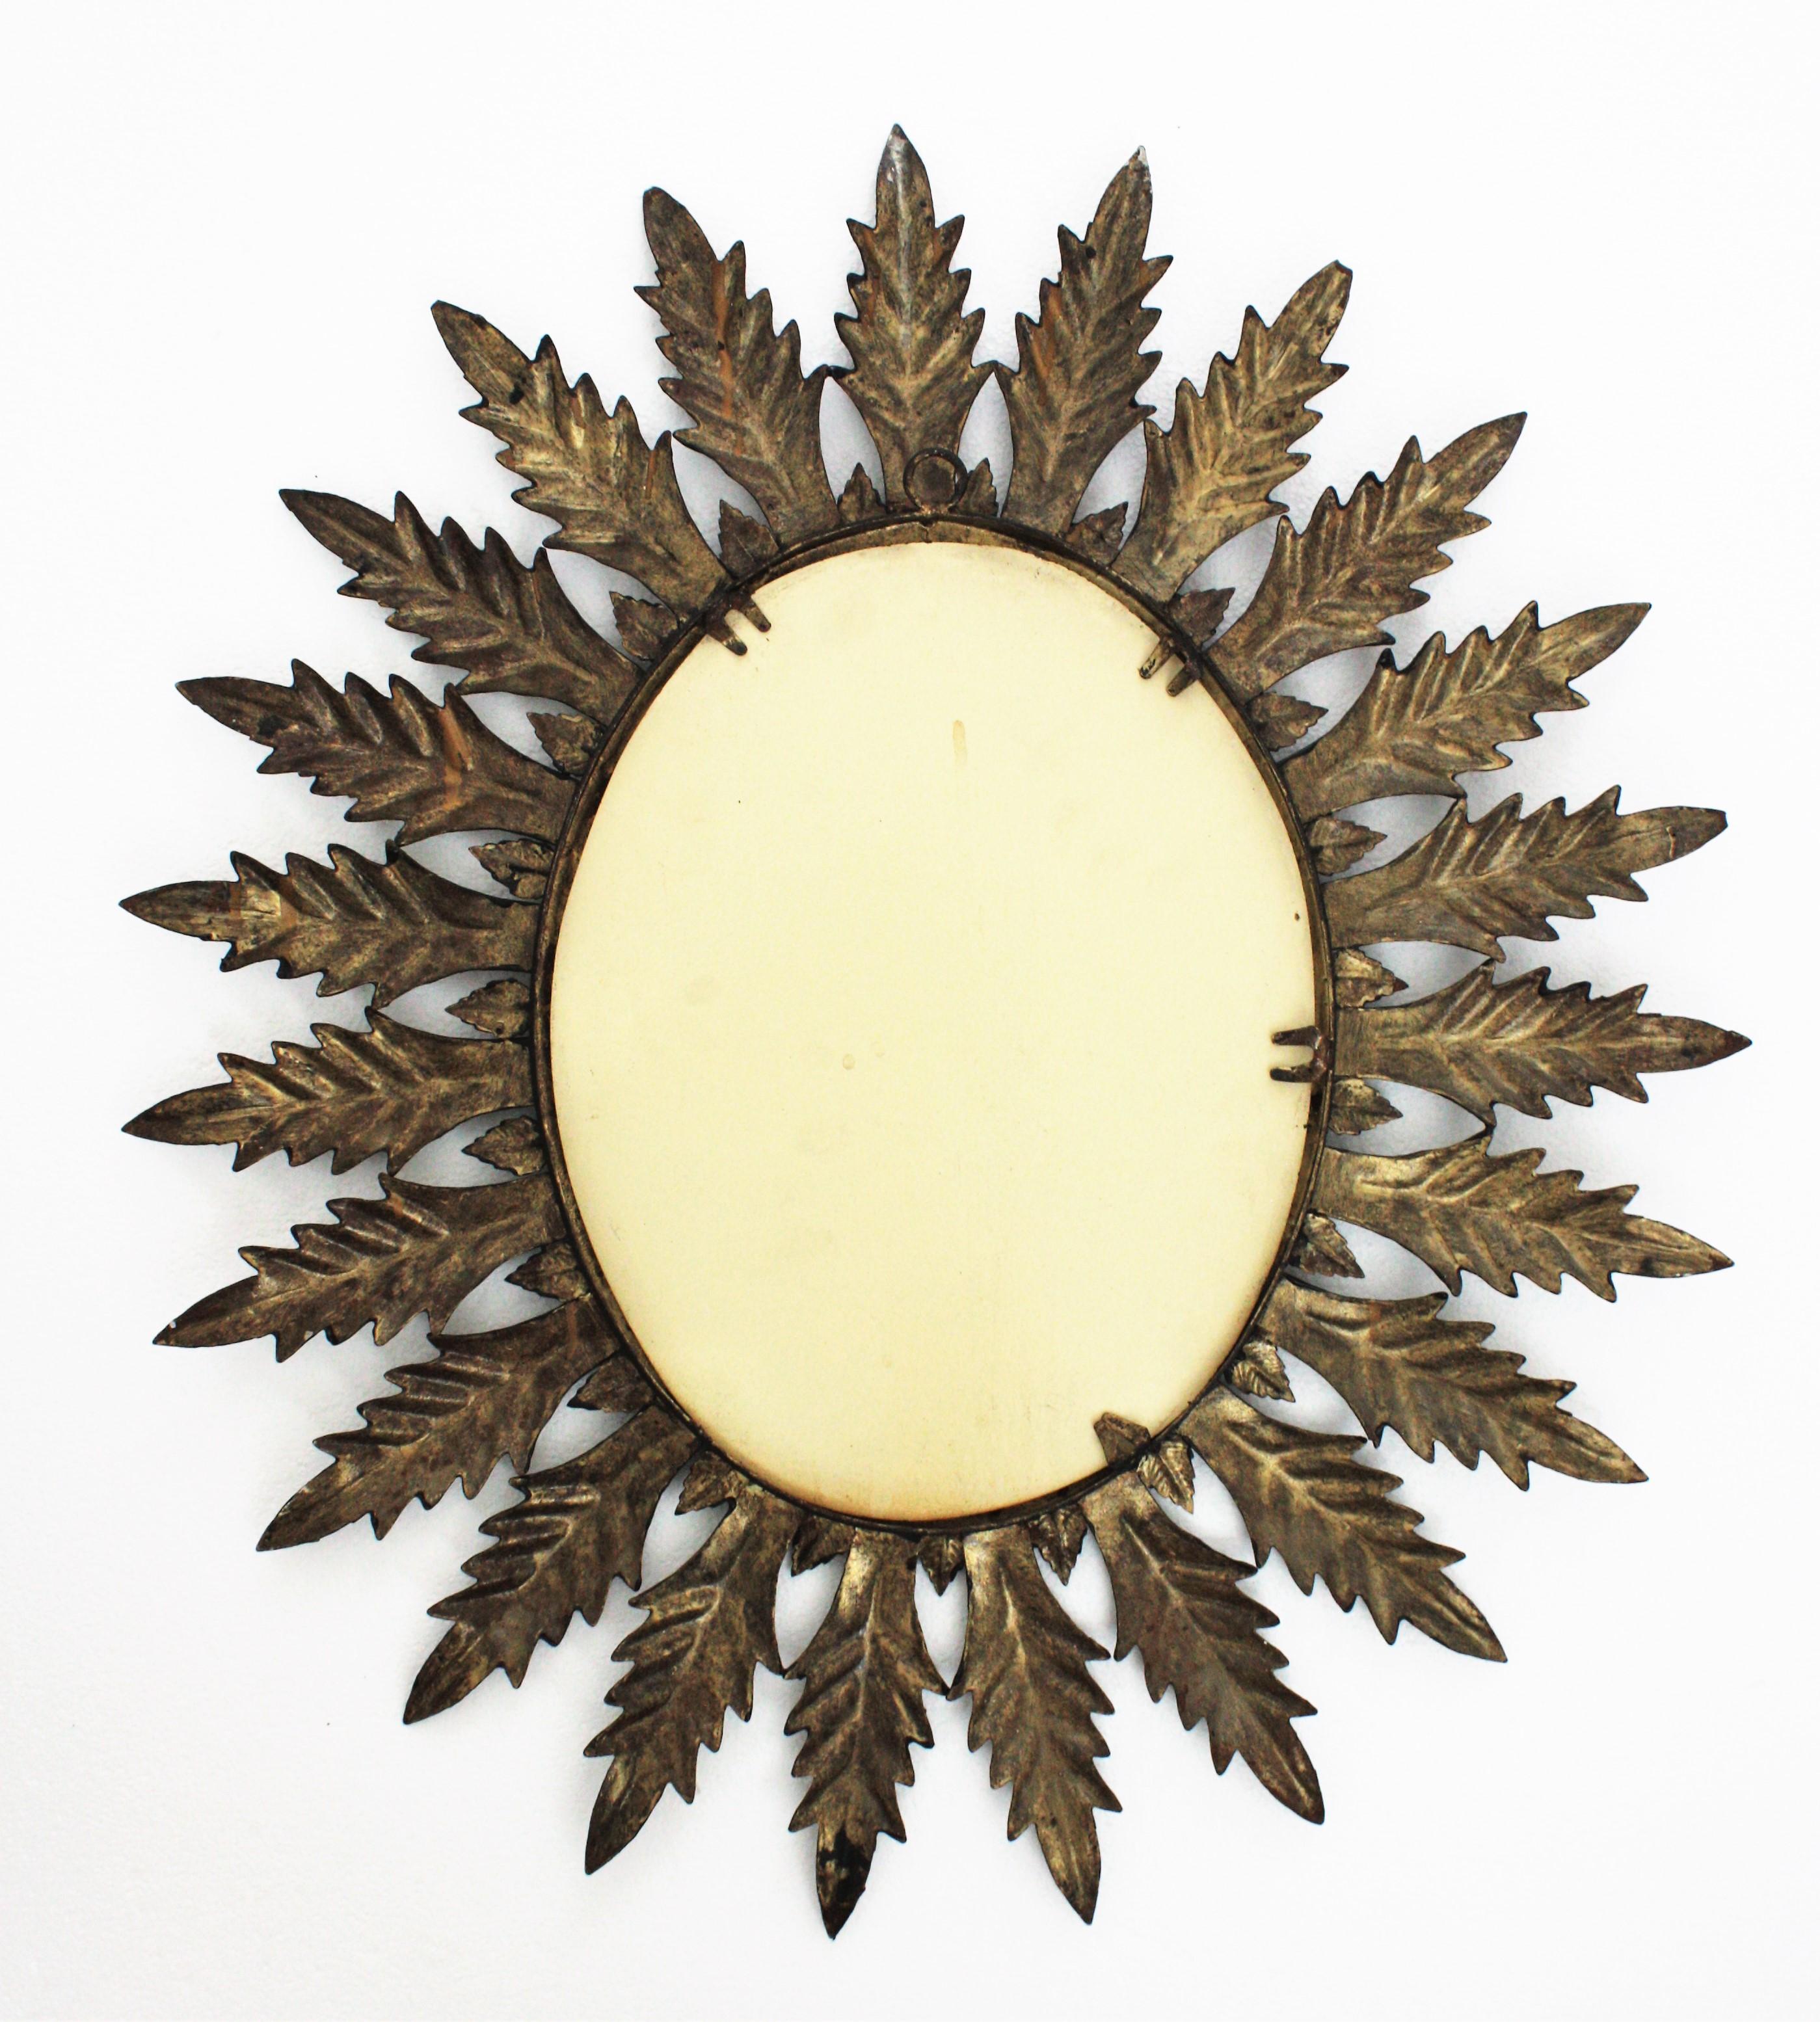 Spanish Sunburst Oval Mirror in Black Painted Iron, 1960s For Sale 4